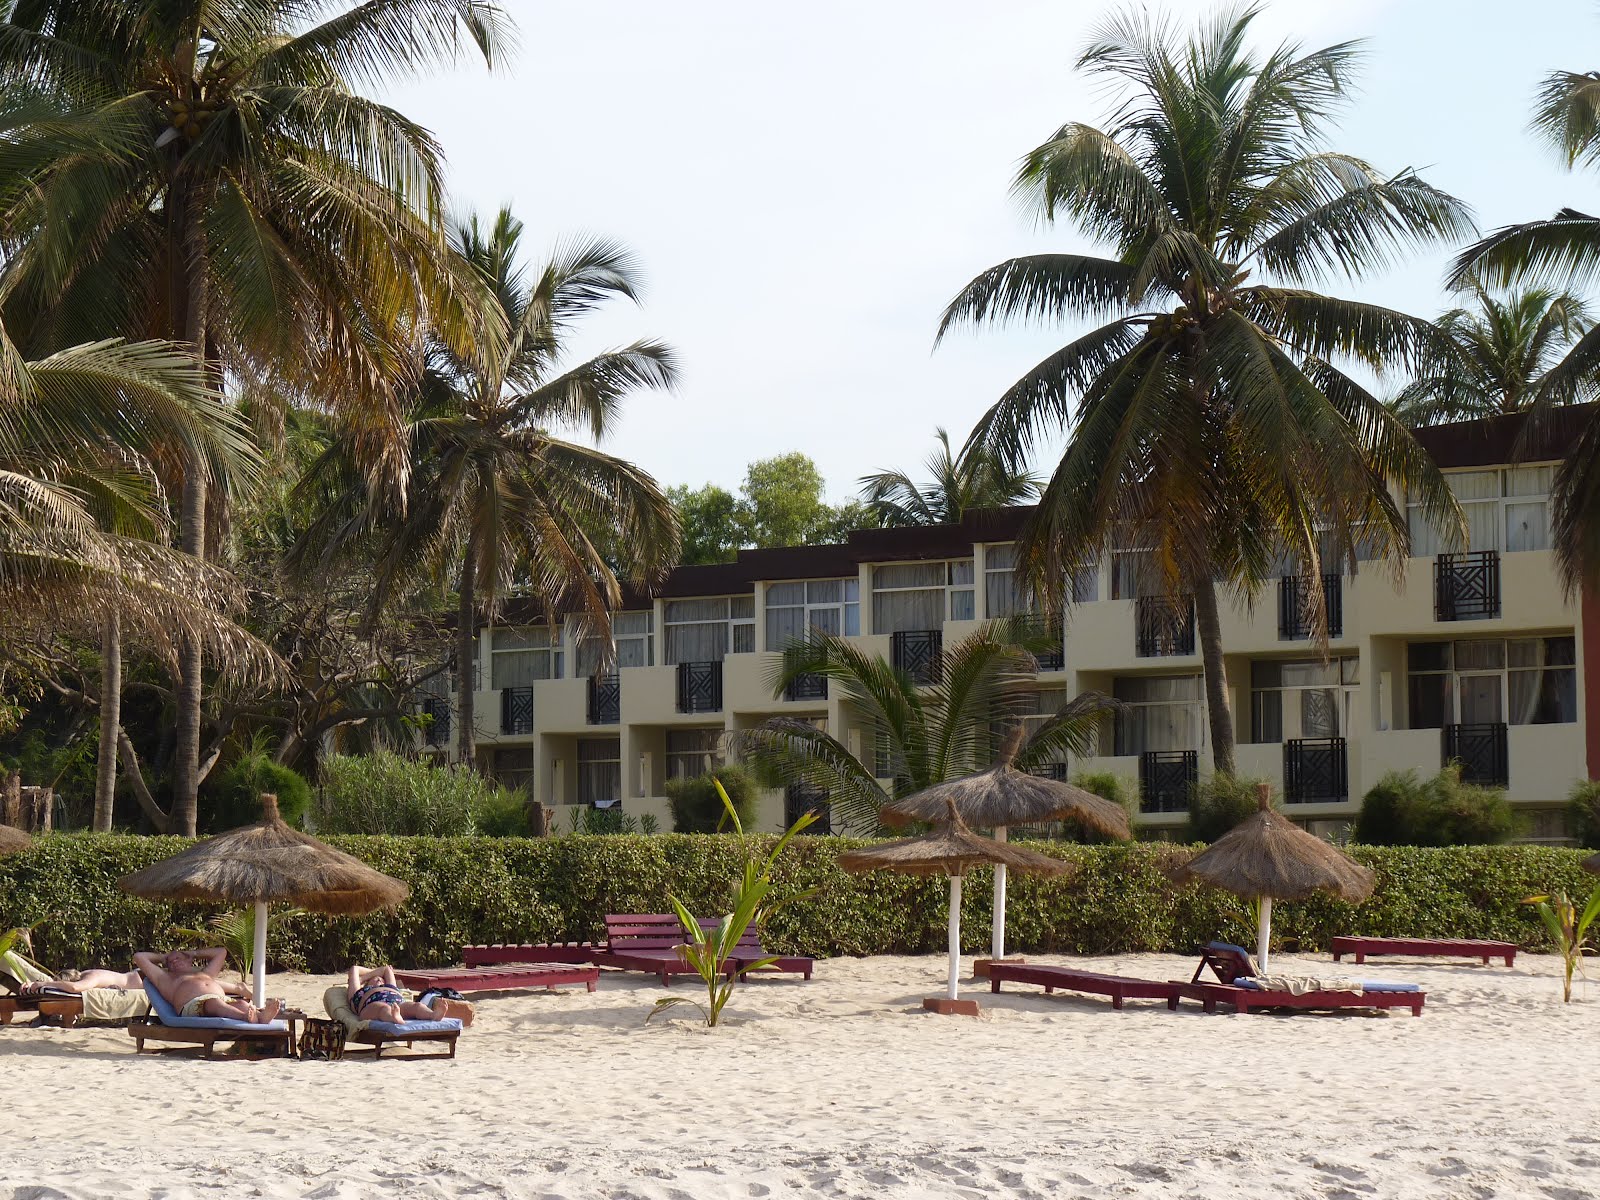 Spending Christmas Holidays in The Gambia? Head to Kombo Beach Hotel